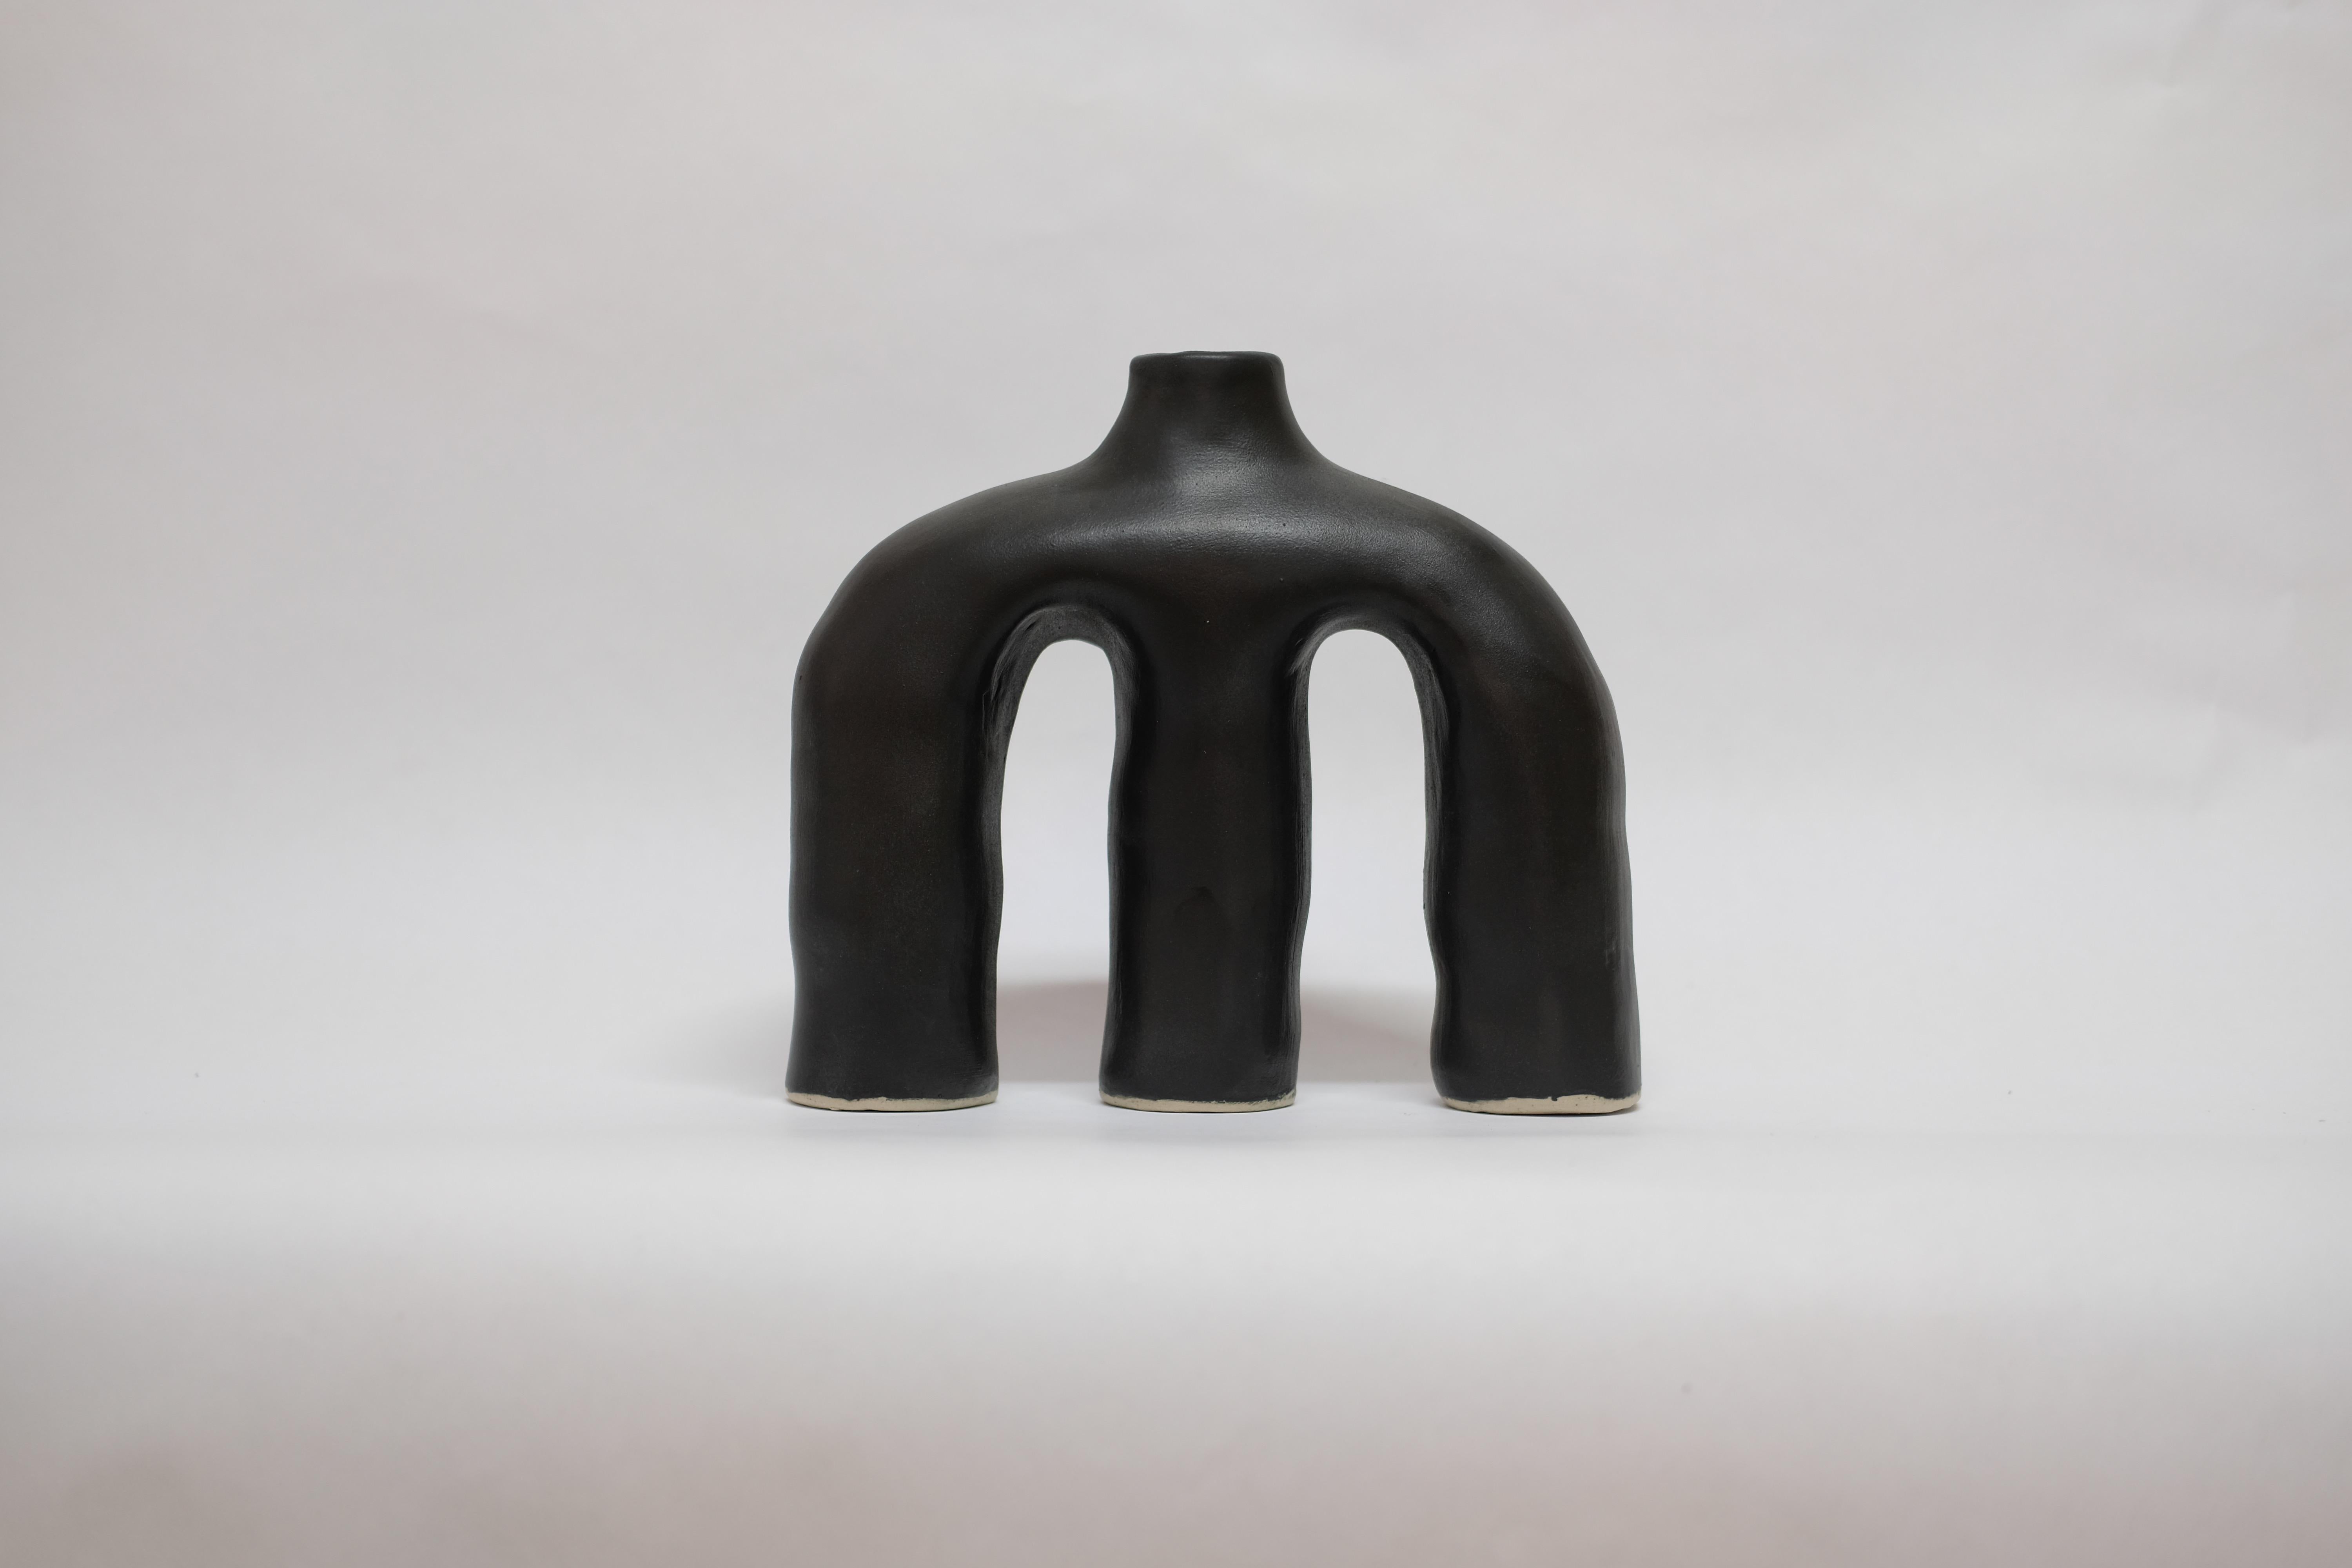 Black Anatomía Sutil stoneware vase by Camila Apaez
One of a kind
Materials: Stoneware
Dimensions: 25 x 8 x 22 cm
Options: white bone, butter milk, charcoal black

This year has been shaped by the topographies of our homes and the uncertainty of our